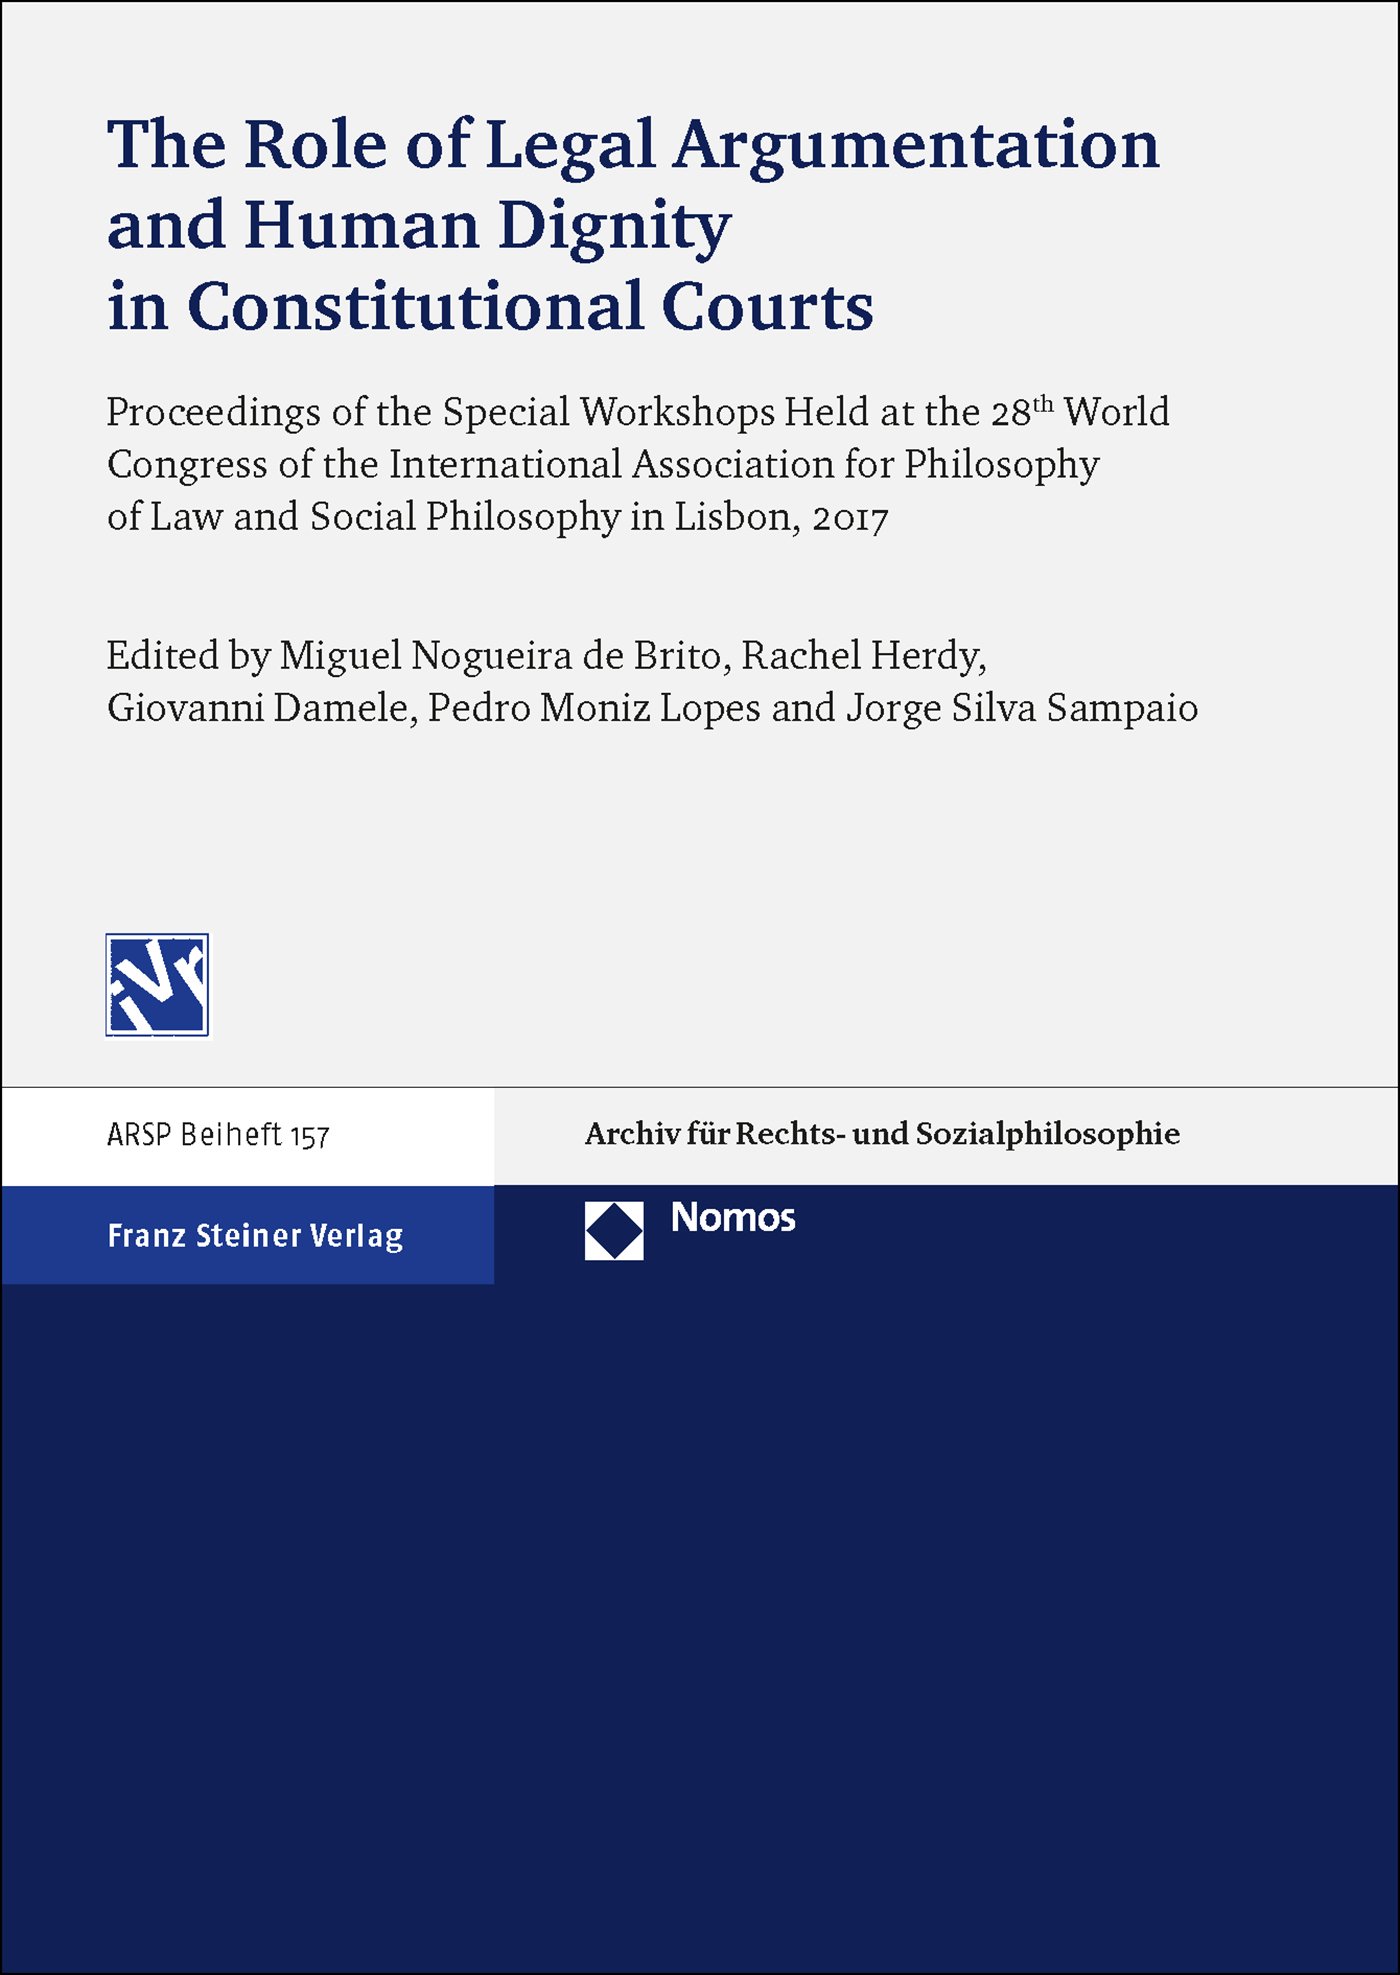 The Role of Legal Argumentation and Human Dignity in Constitutional Courts